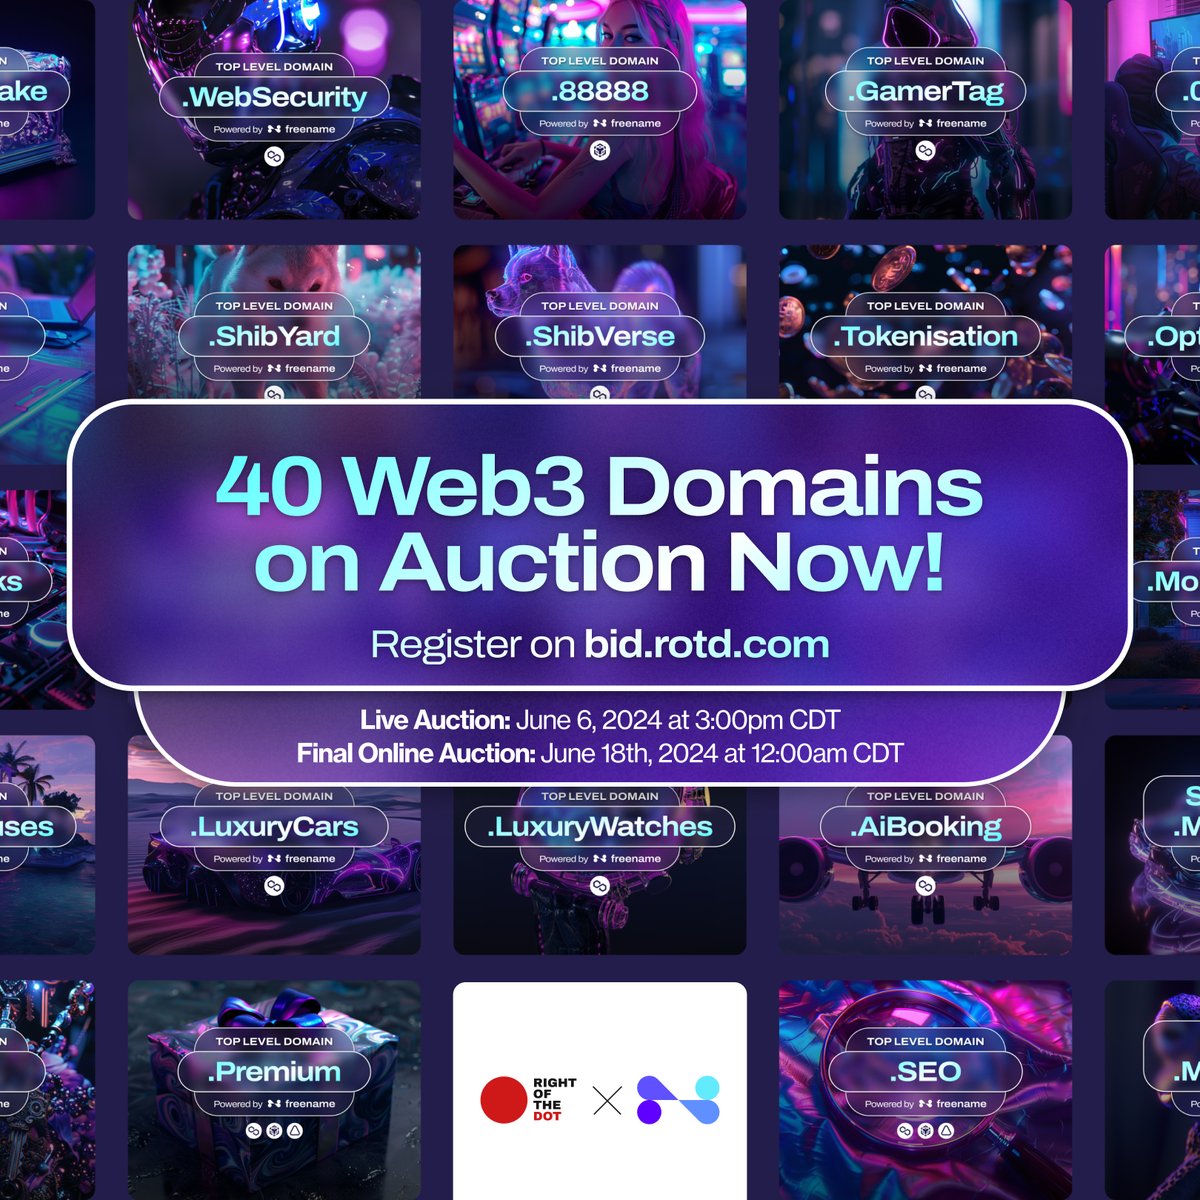 Ready to bid? Freename is back with another auction of valuable Web3 domains, in partnership with
@RIGHToftheDOT 

If you missed the last auction in December, here's your chance.     

Register at bid.rotd.com and good luck 🍀

#WEB3DOMAINS #Auction